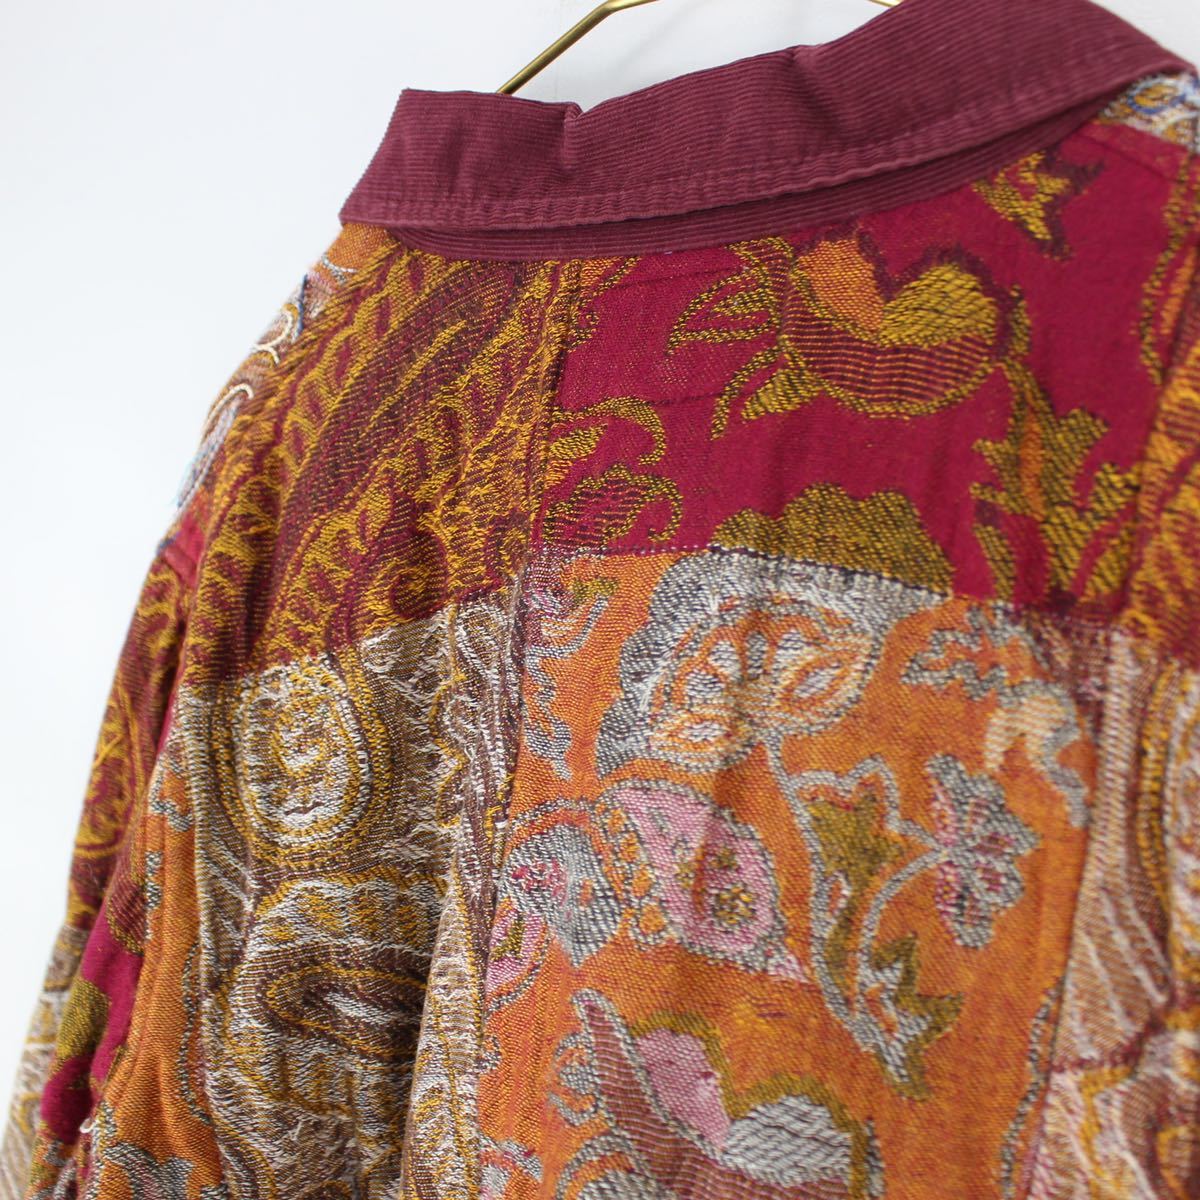 USA VINTAGE TANTRUMS PAISLEY PATTERNED EMBROIDERY JACKET MADE IN INDIA/アメリカ古着インド製ペイズリー柄刺繍ジャケット